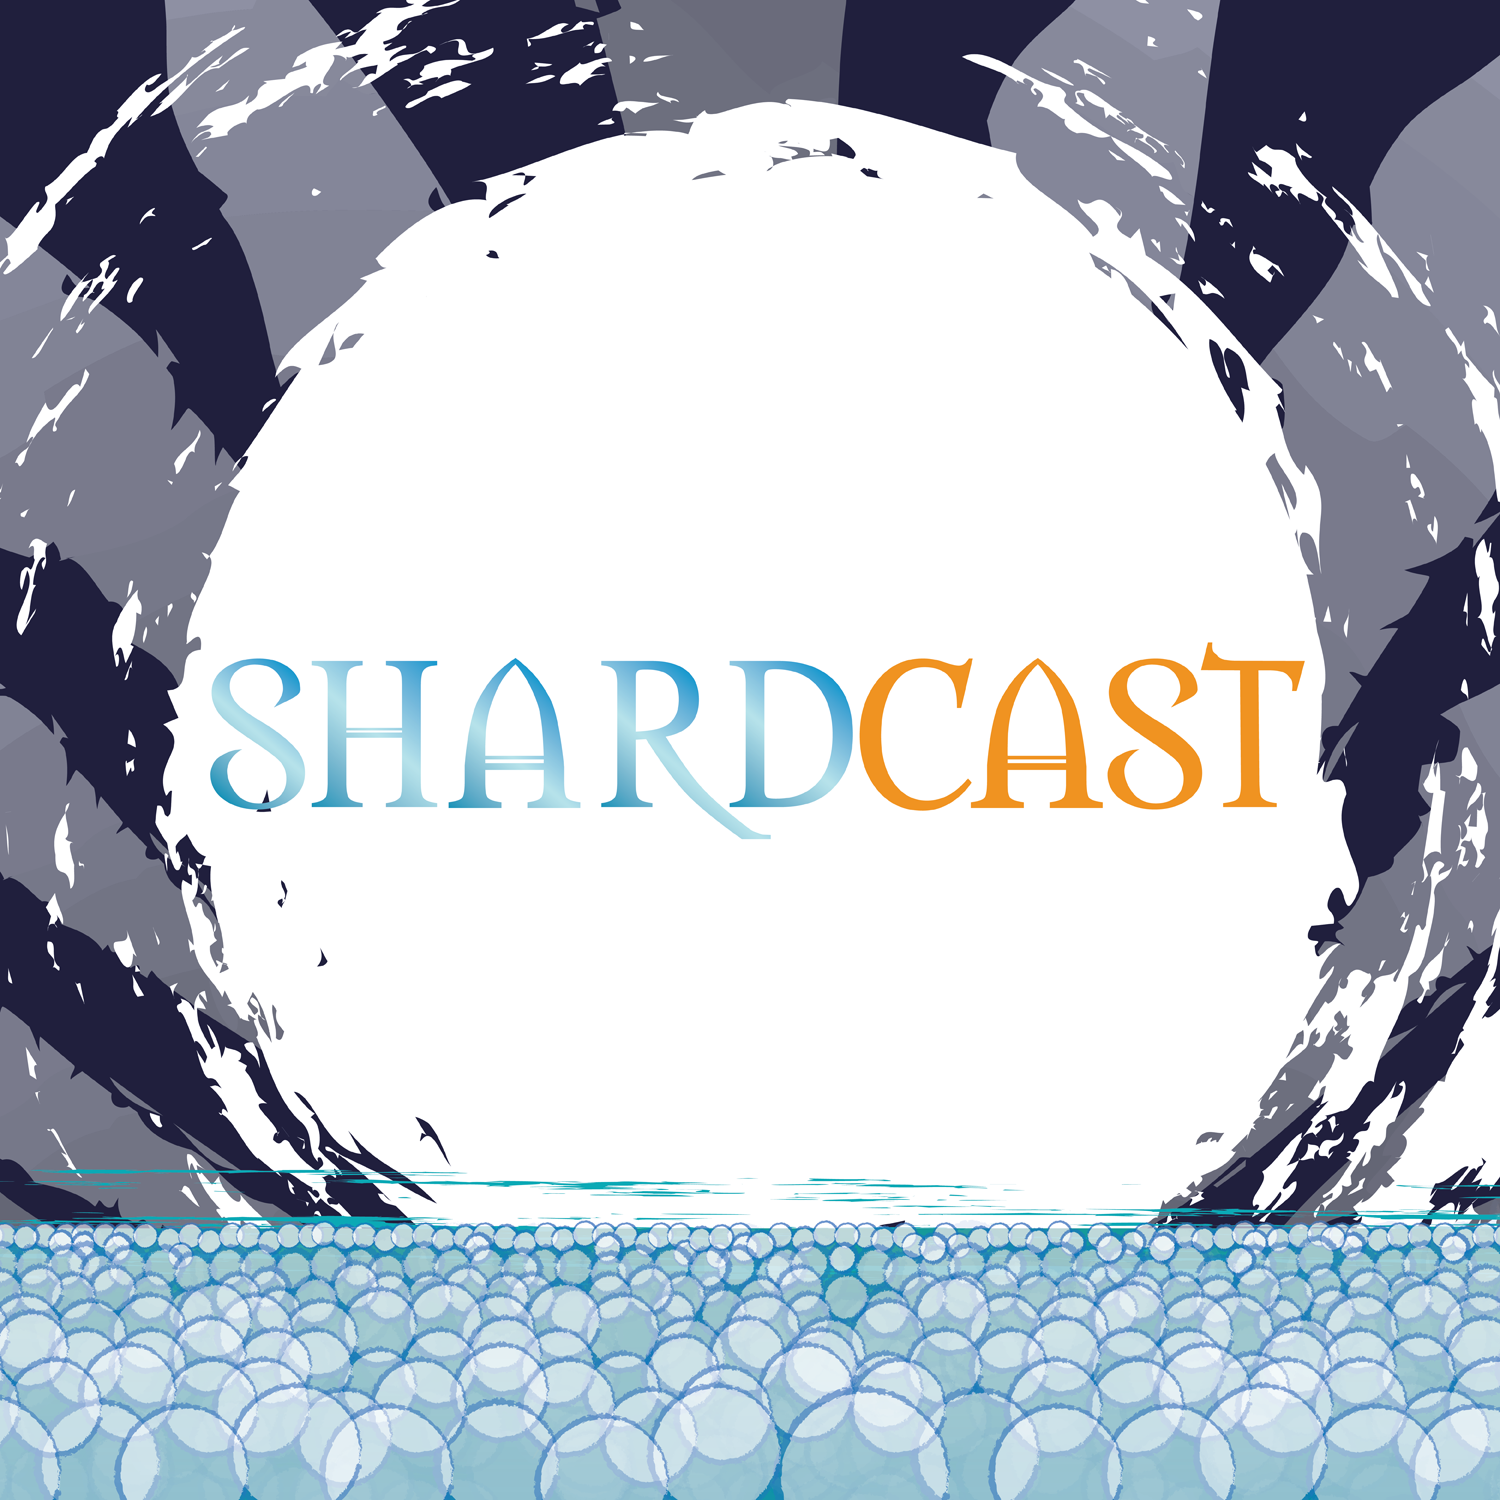 More information about "Shardcast: Renarin and Rlain"